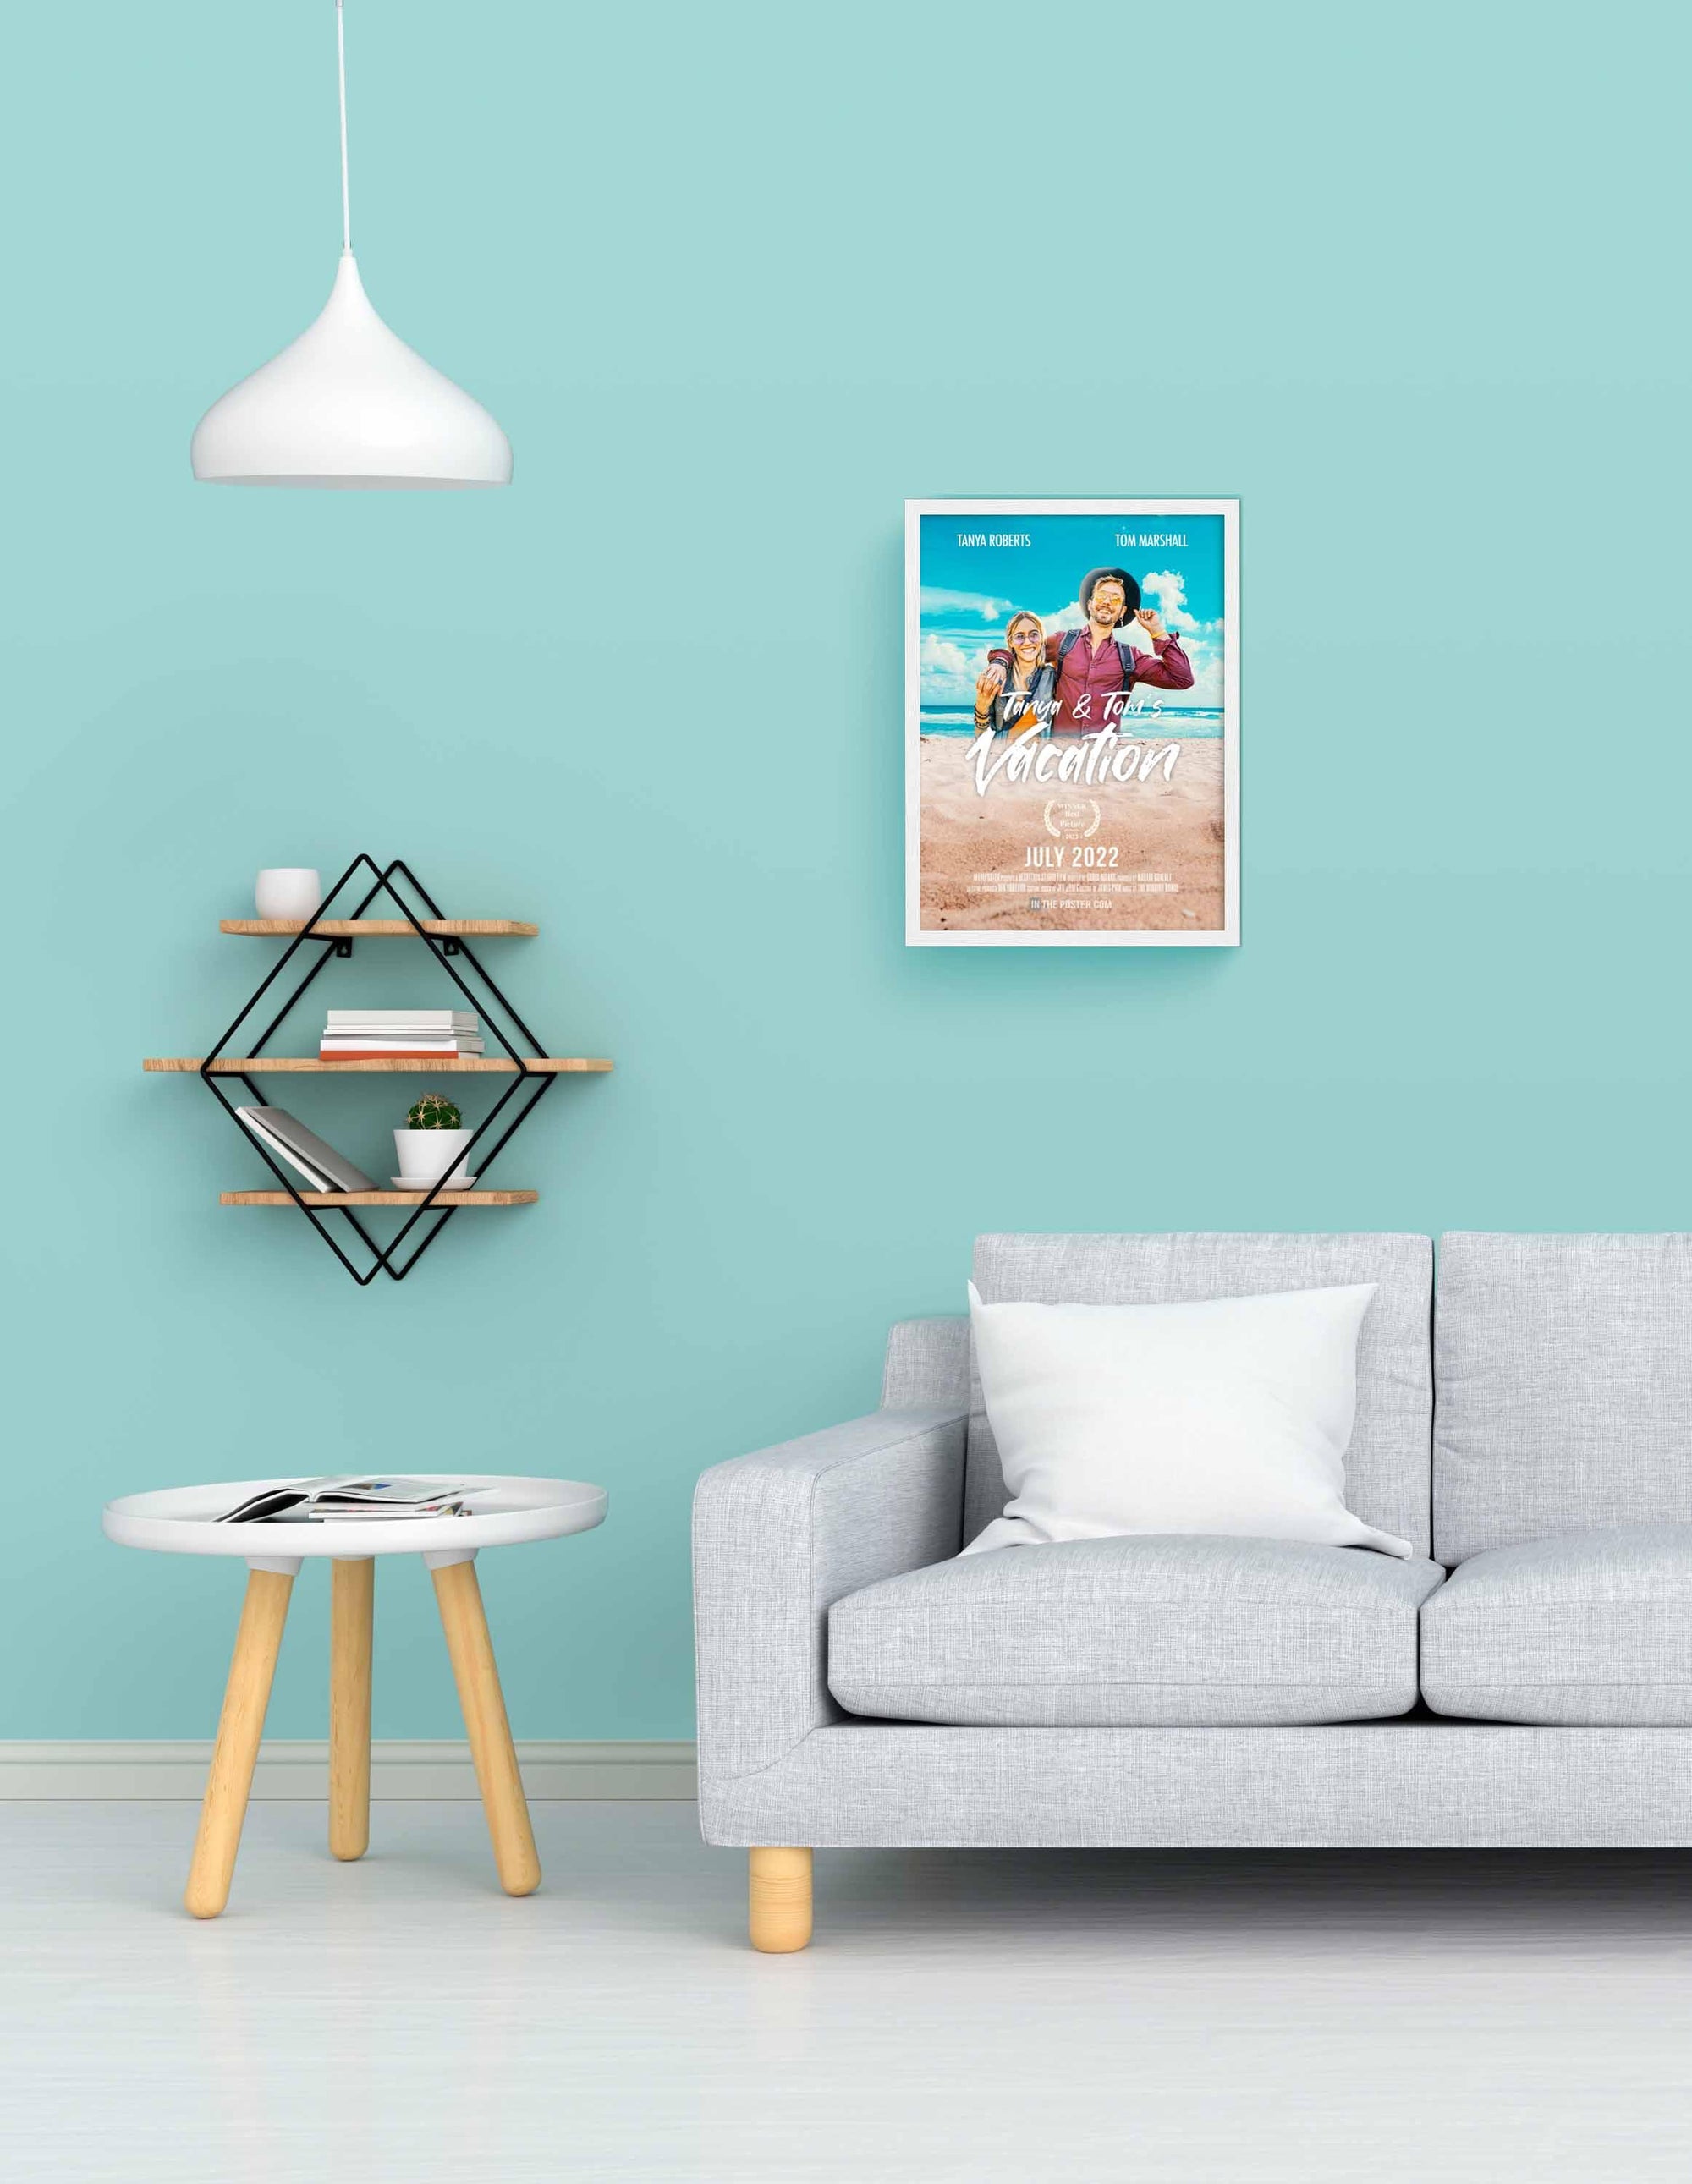 The Vacation - Travel Movie Poster in size small in a picture frame on a blue wall above a grey sofa